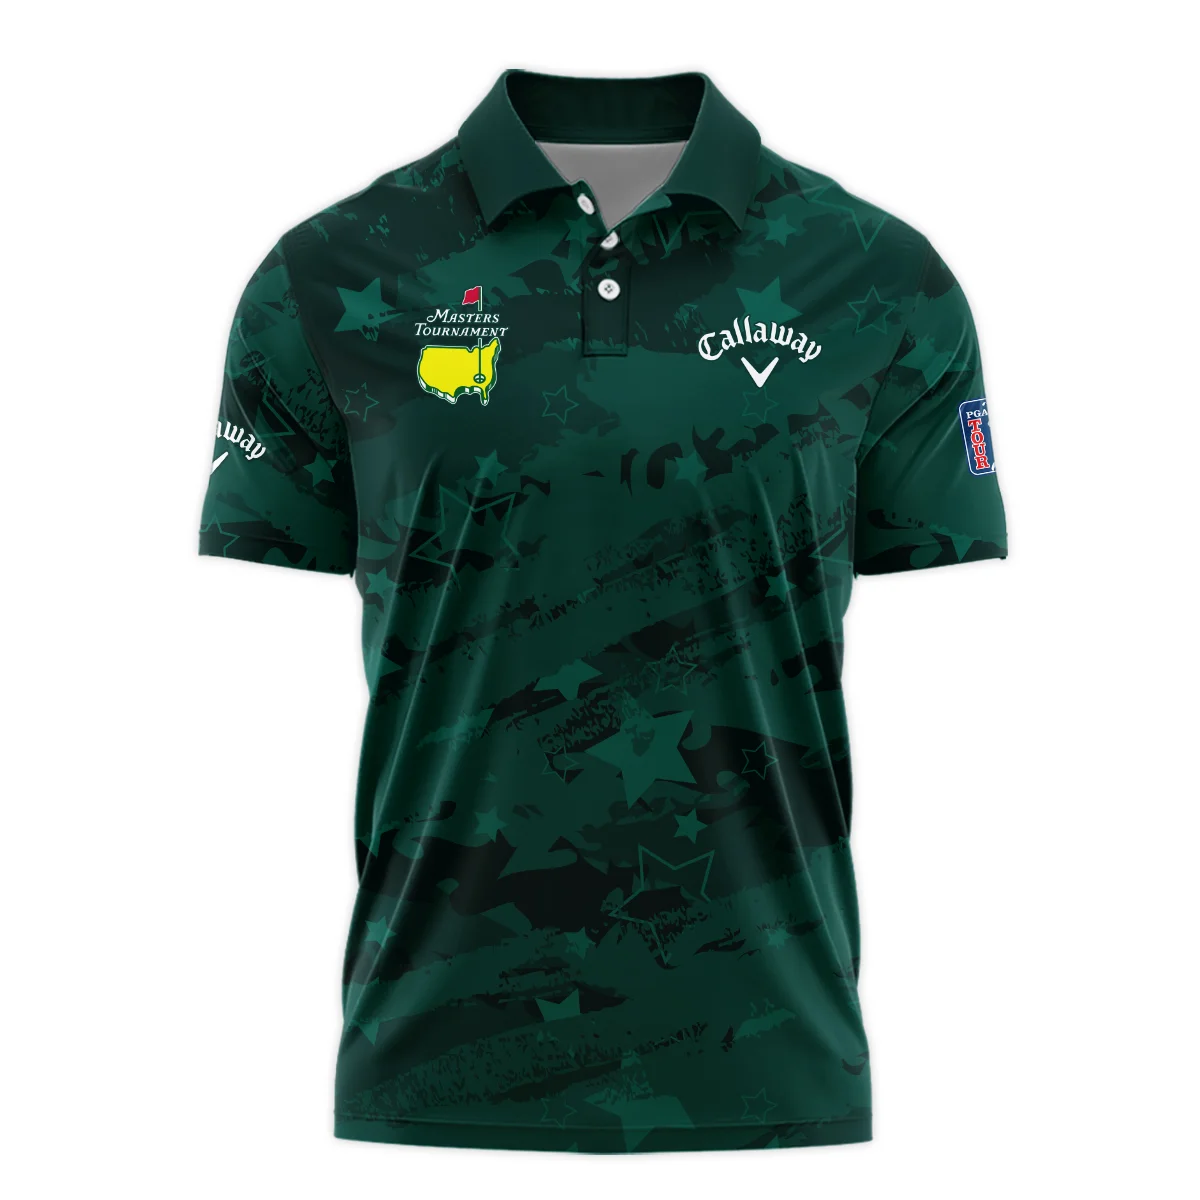 Dark Green Stars Pattern Grunge Background Masters Tournament Callaway Vneck Long Polo Shirt Style Classic Long Polo Shirt For Men